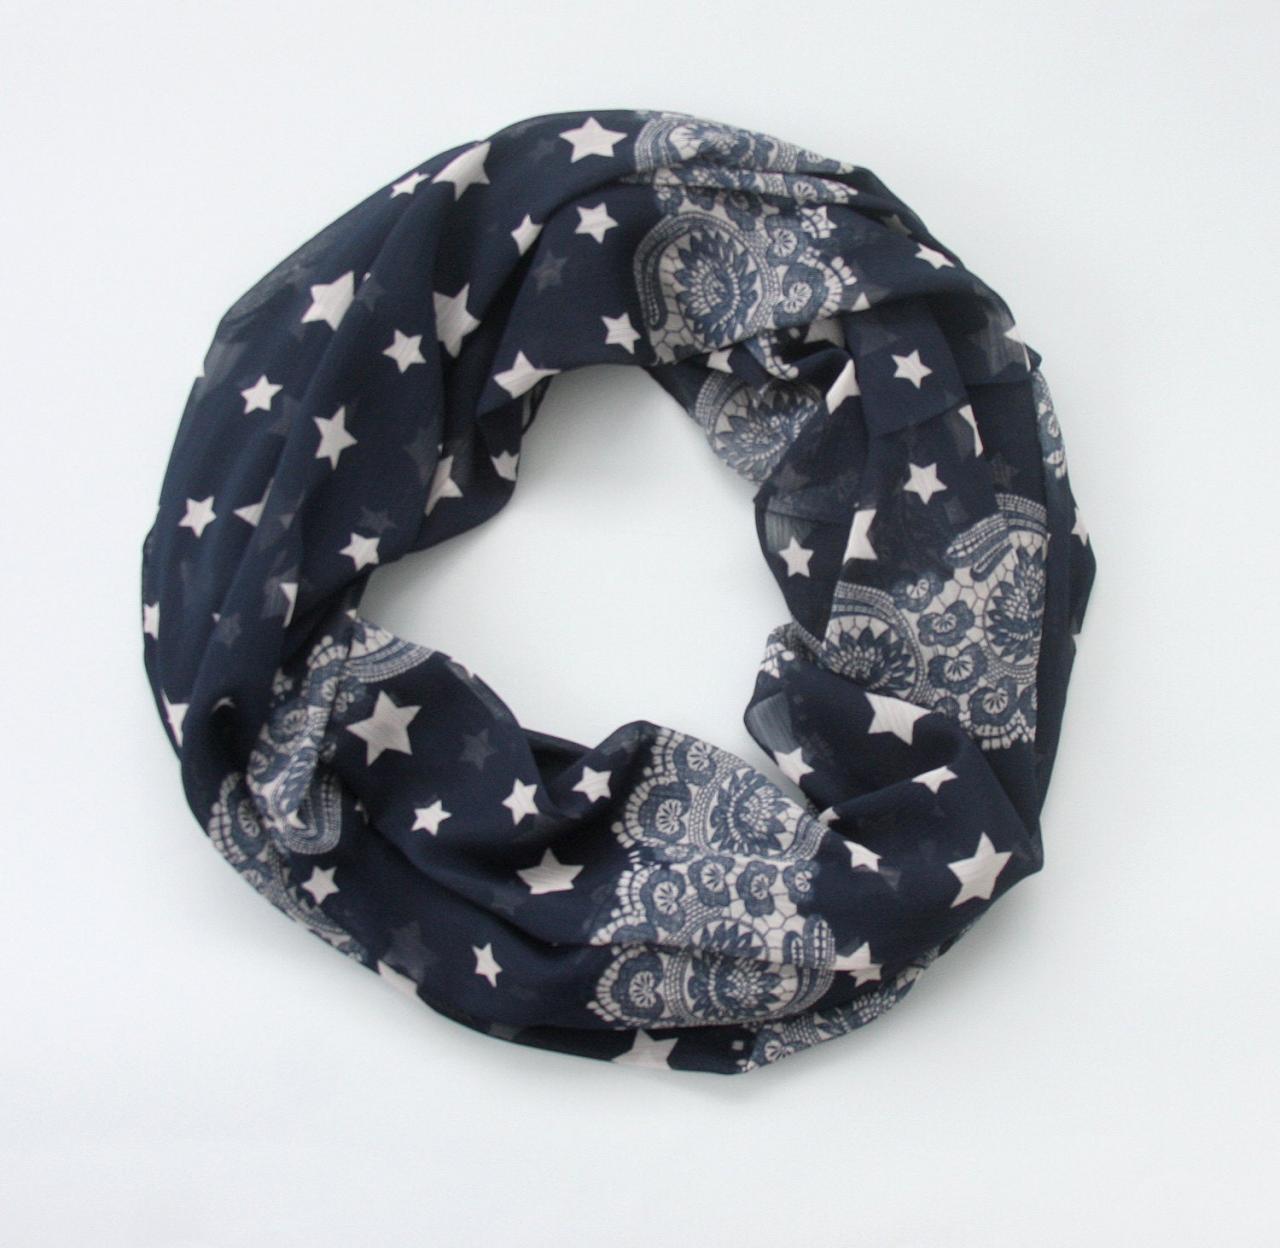 Stars Scarf, Lace Stars Infinity Scarf, 4th Of July Navy Blue Circle Scarf, Gift For Her